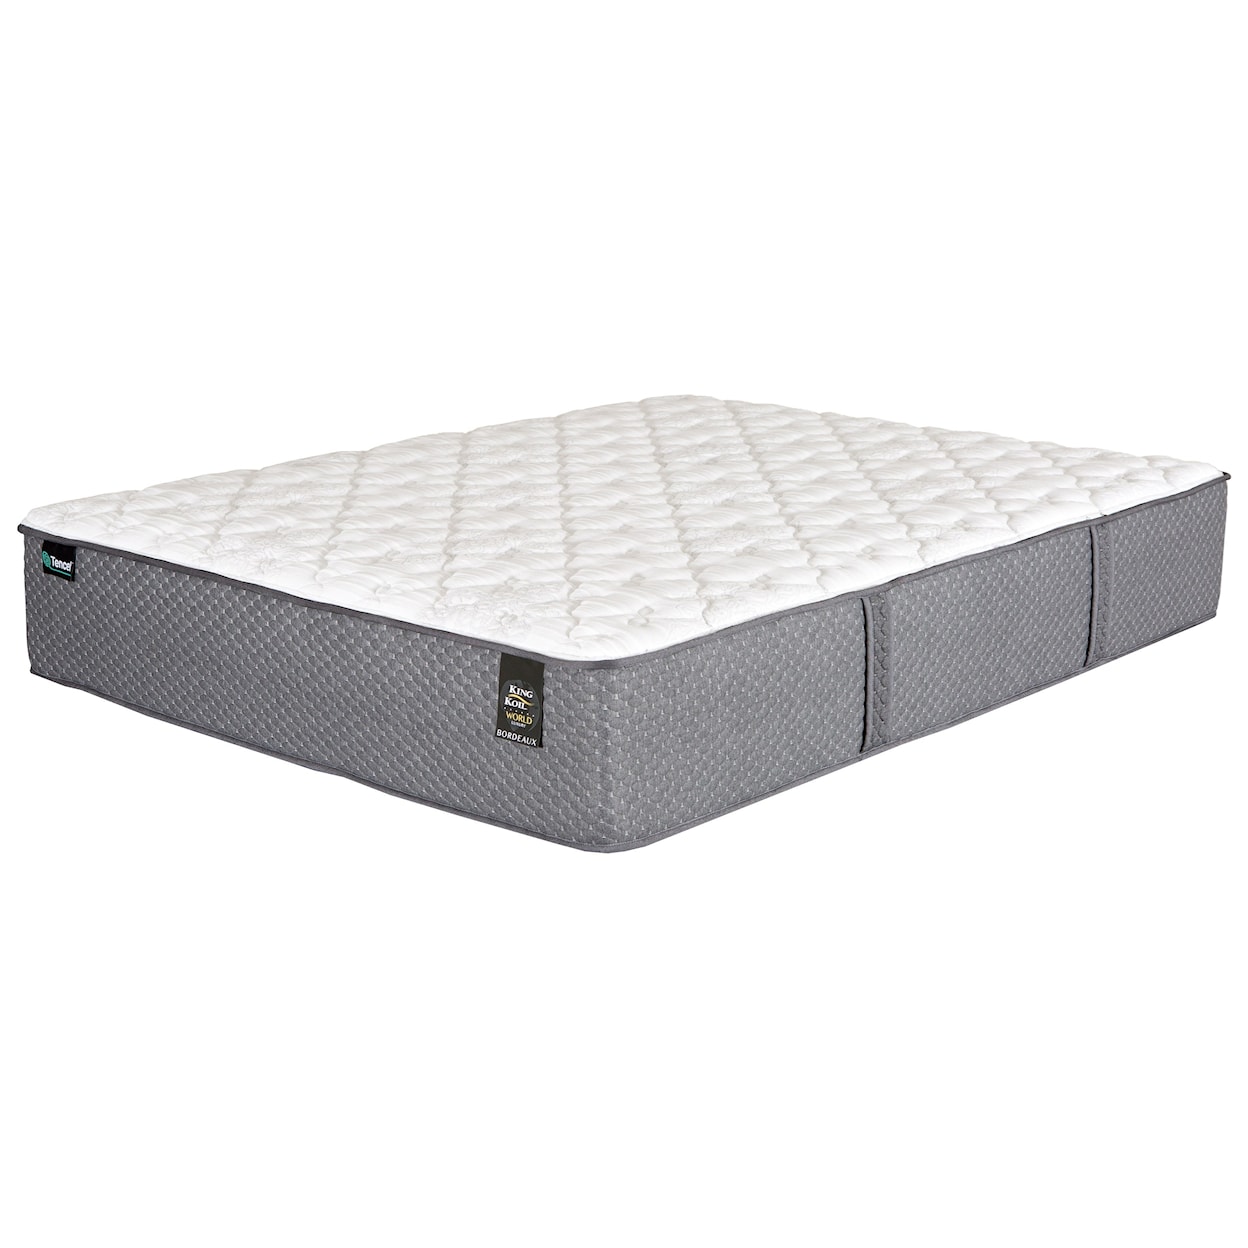 King Koil Beaumont EF Full Pocketed Coil Mattress